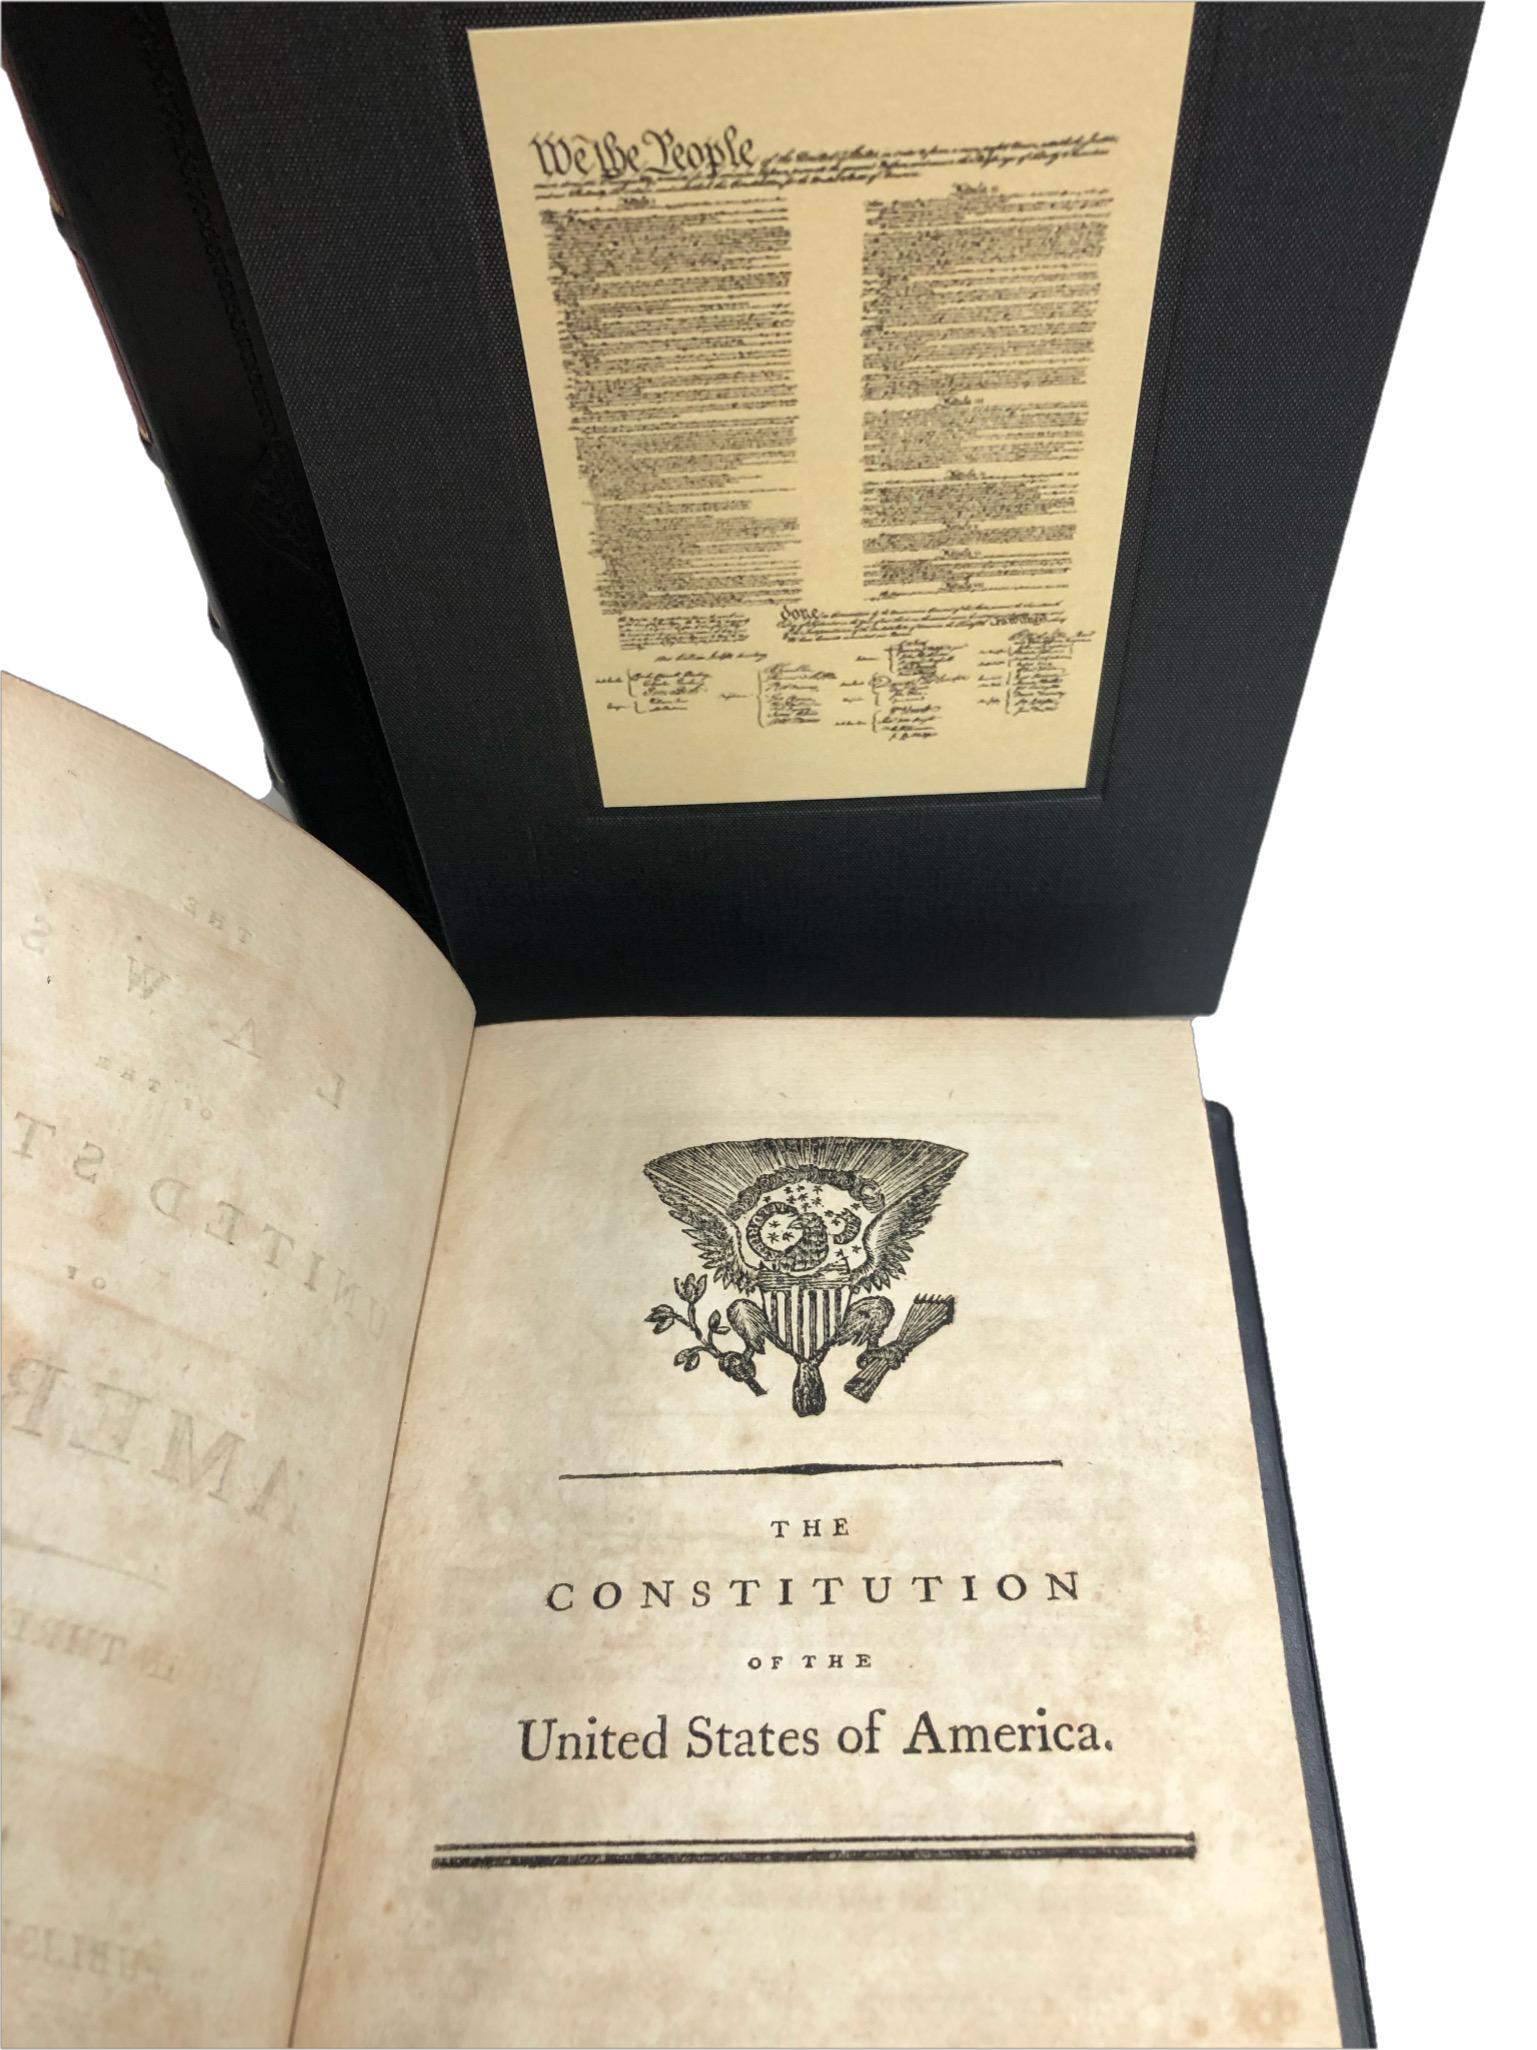 Paper The Laws of the United States of America, First Edition, 3 Vol. Set, 1796-7